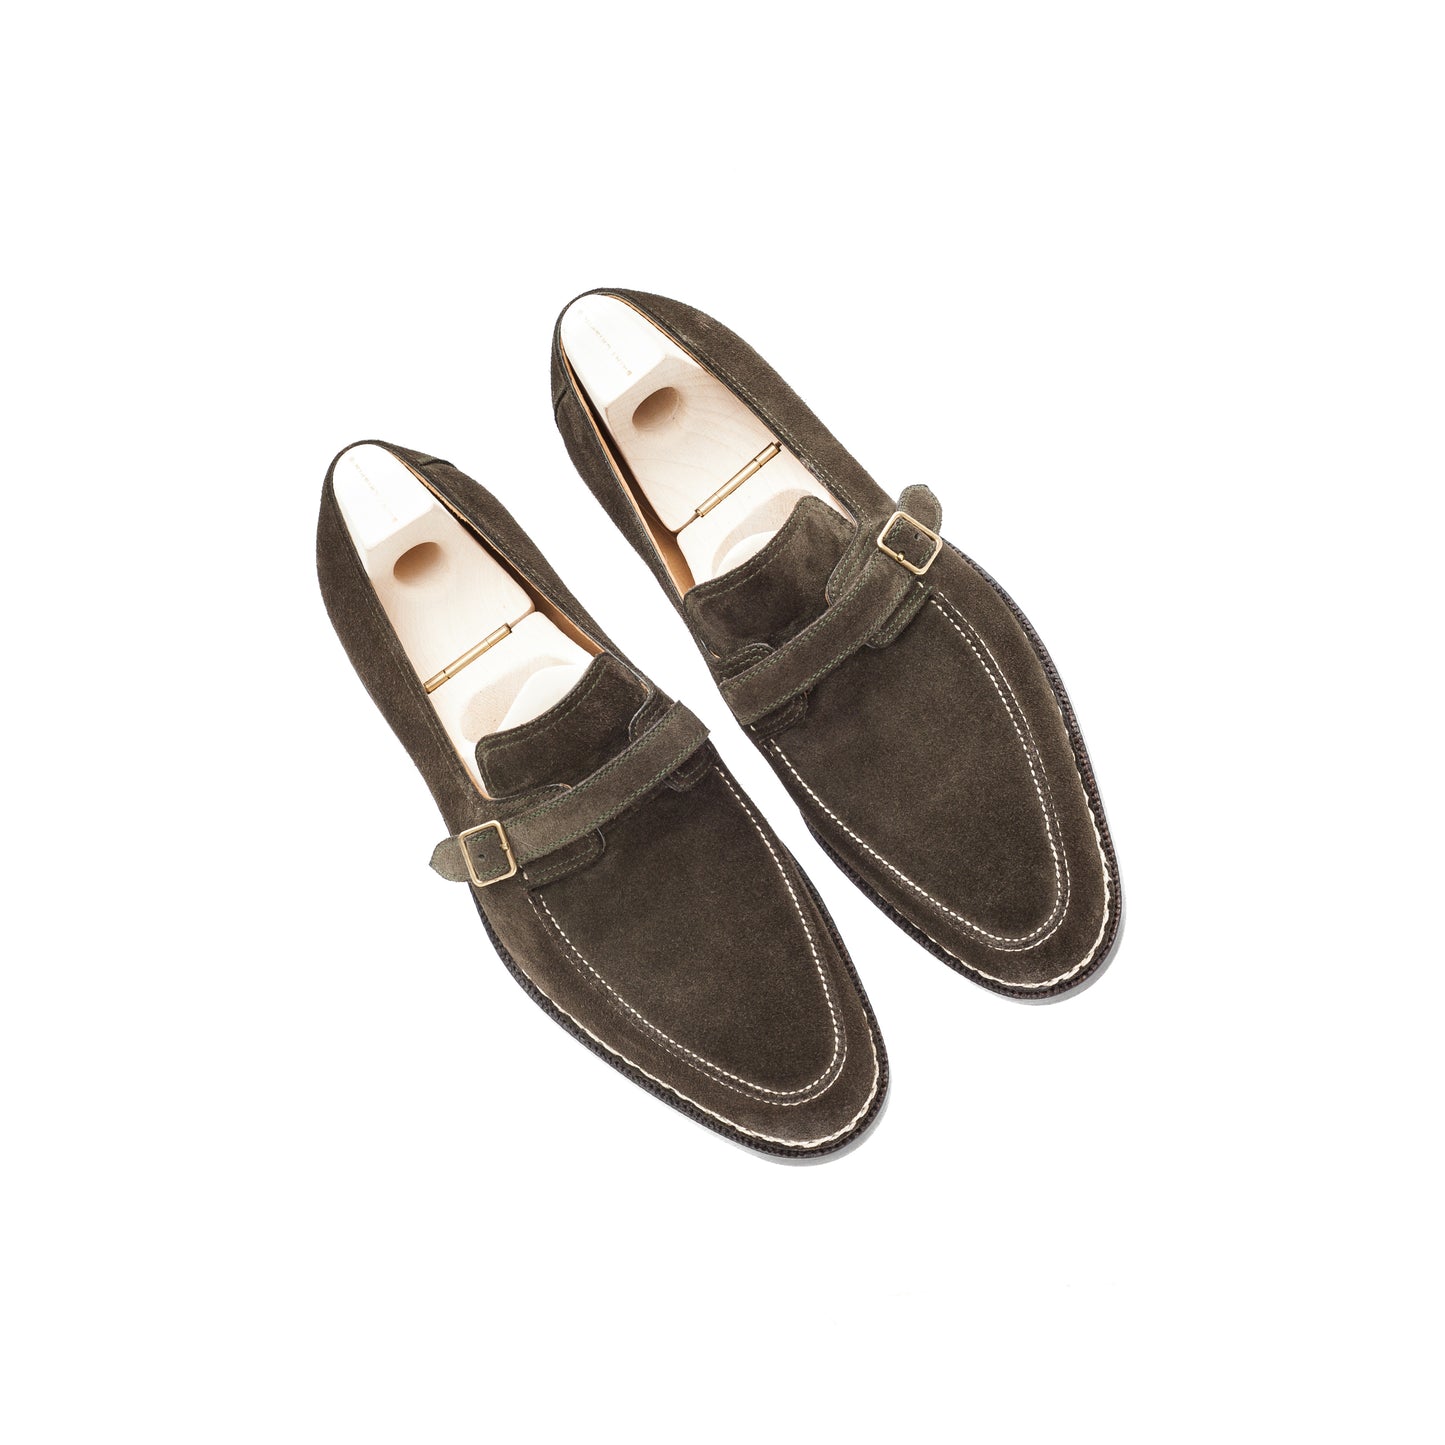 Monk loafer with hand-stitched apron in dark Military green suede leather